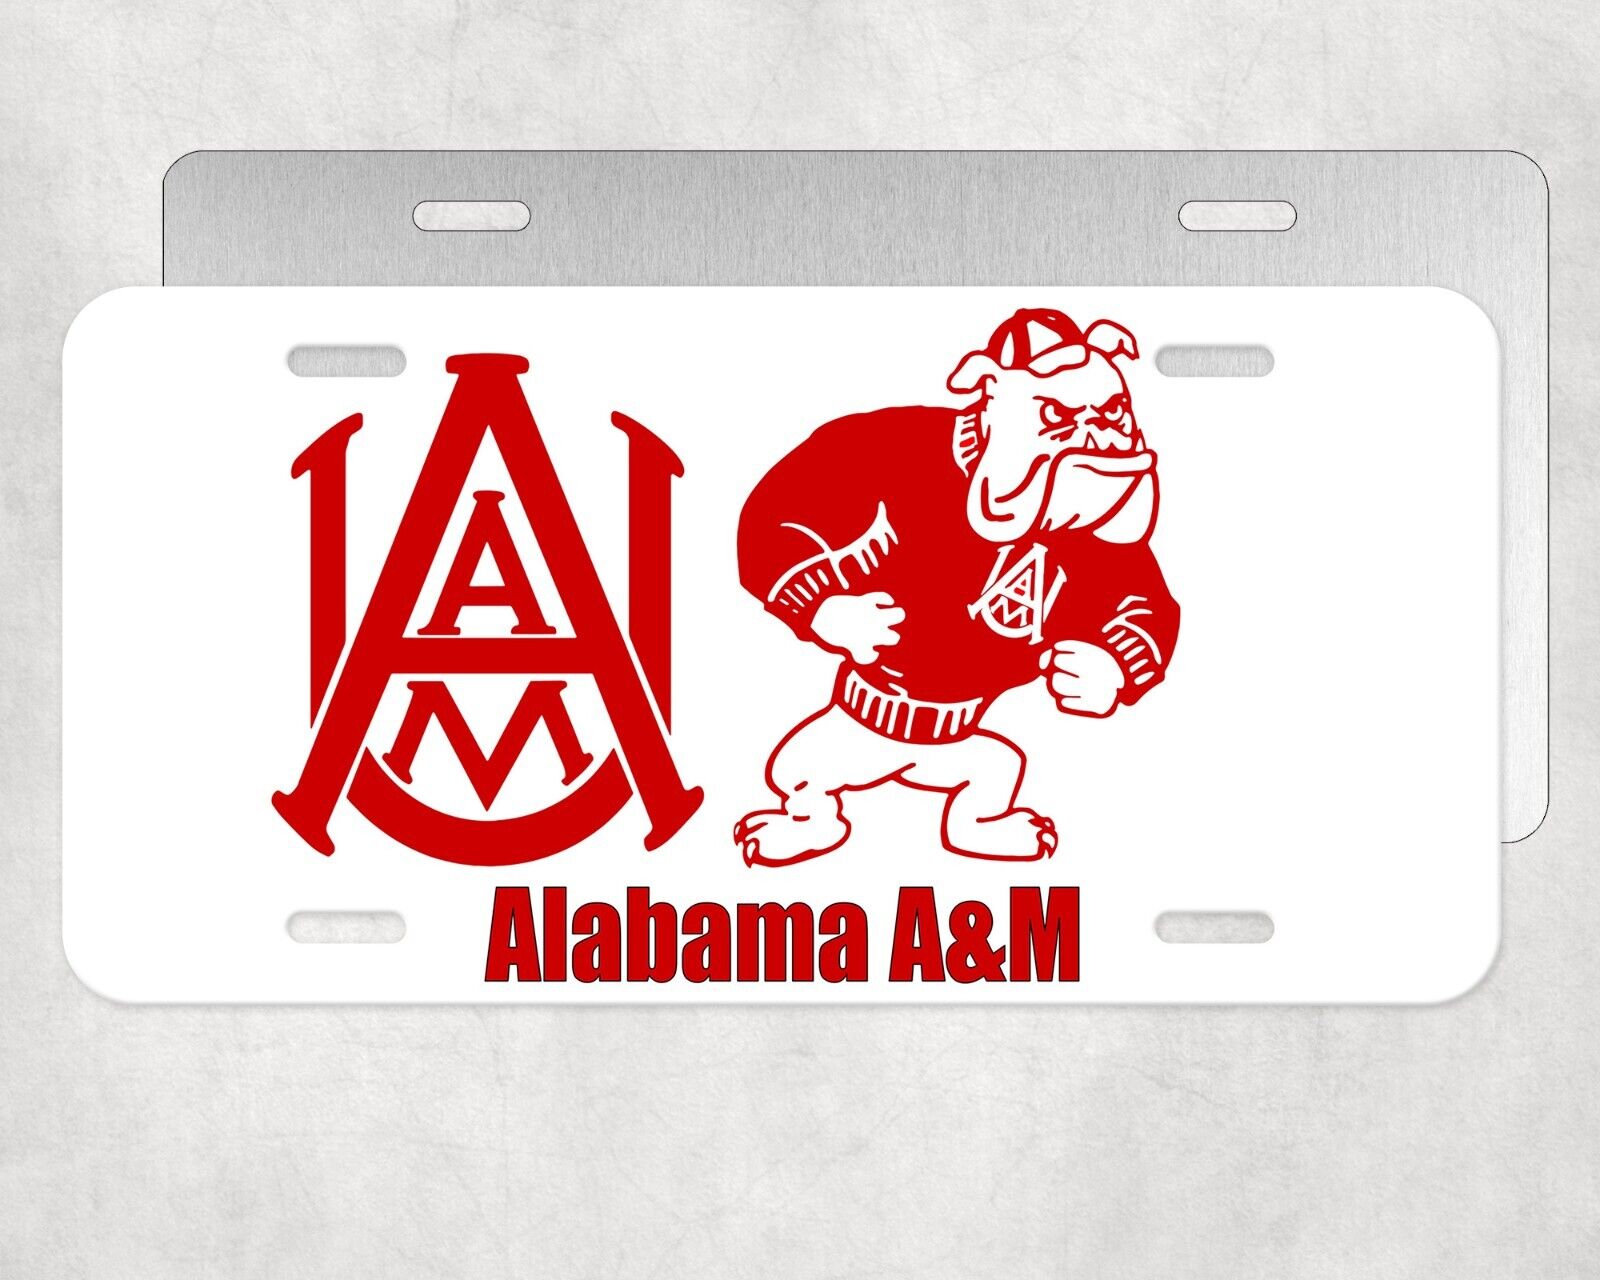 License Plate Tag Alabama A&M University Collage